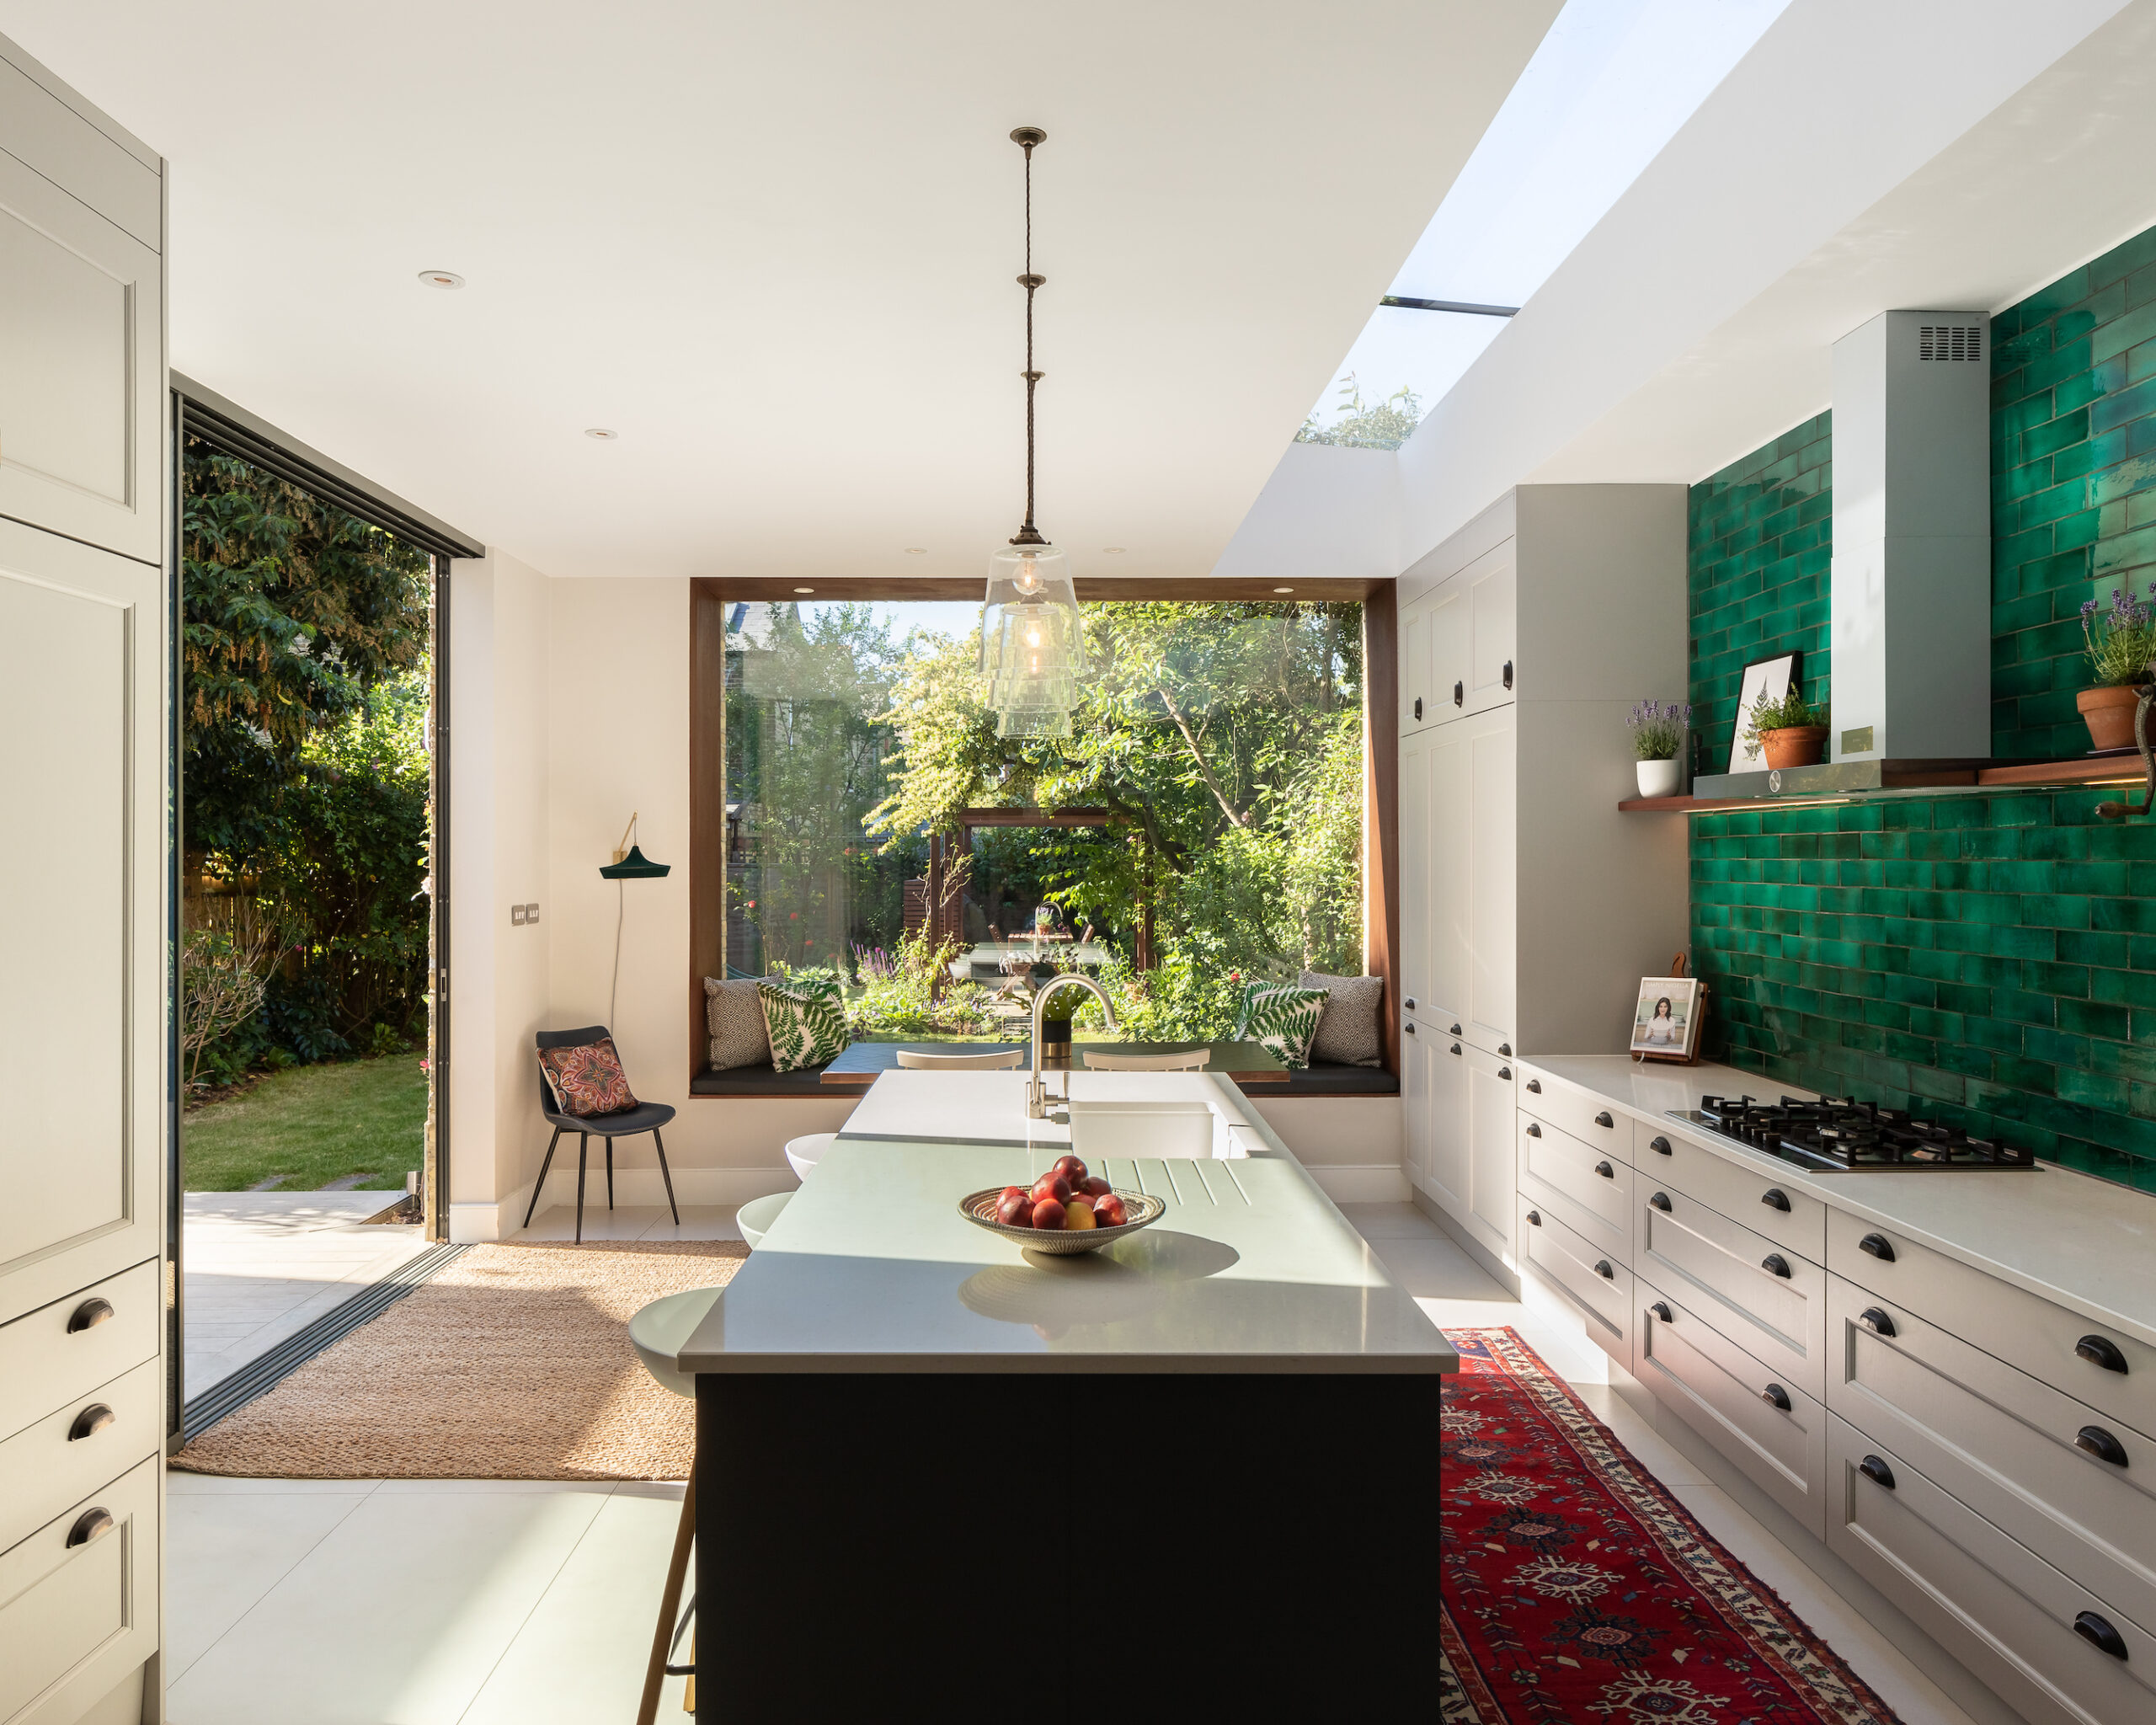 Bringing the Outdoors In with Modern Design Touches